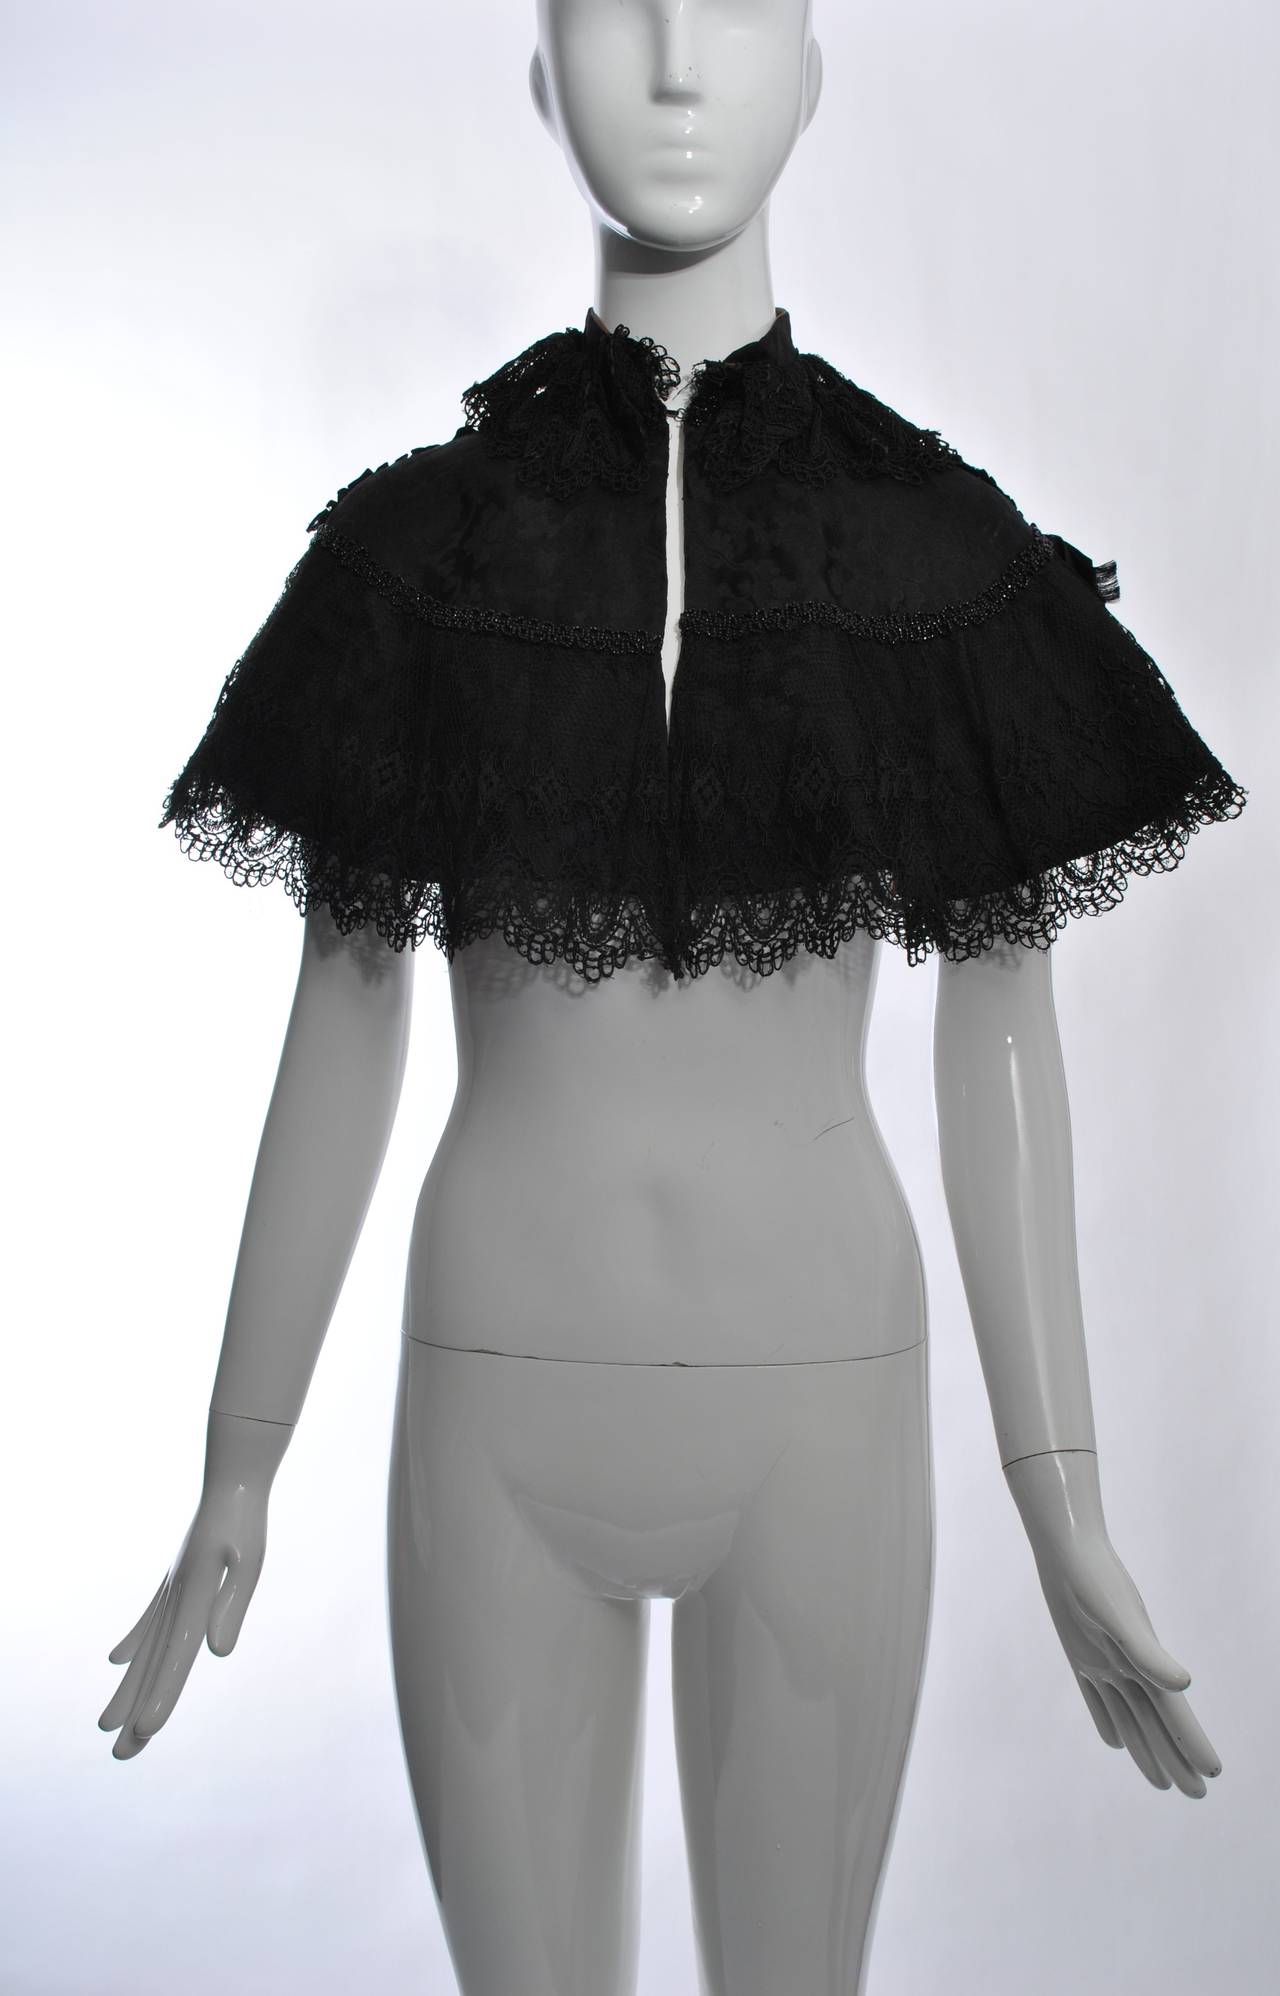 A beautiful piece to accessorize your contemporary wardrobe, this black silk capelet has a scalloped lace overlay and is embellished with a row of black beads around the upper arms and back. finished with 2 bows at the shoulders and a high-neck